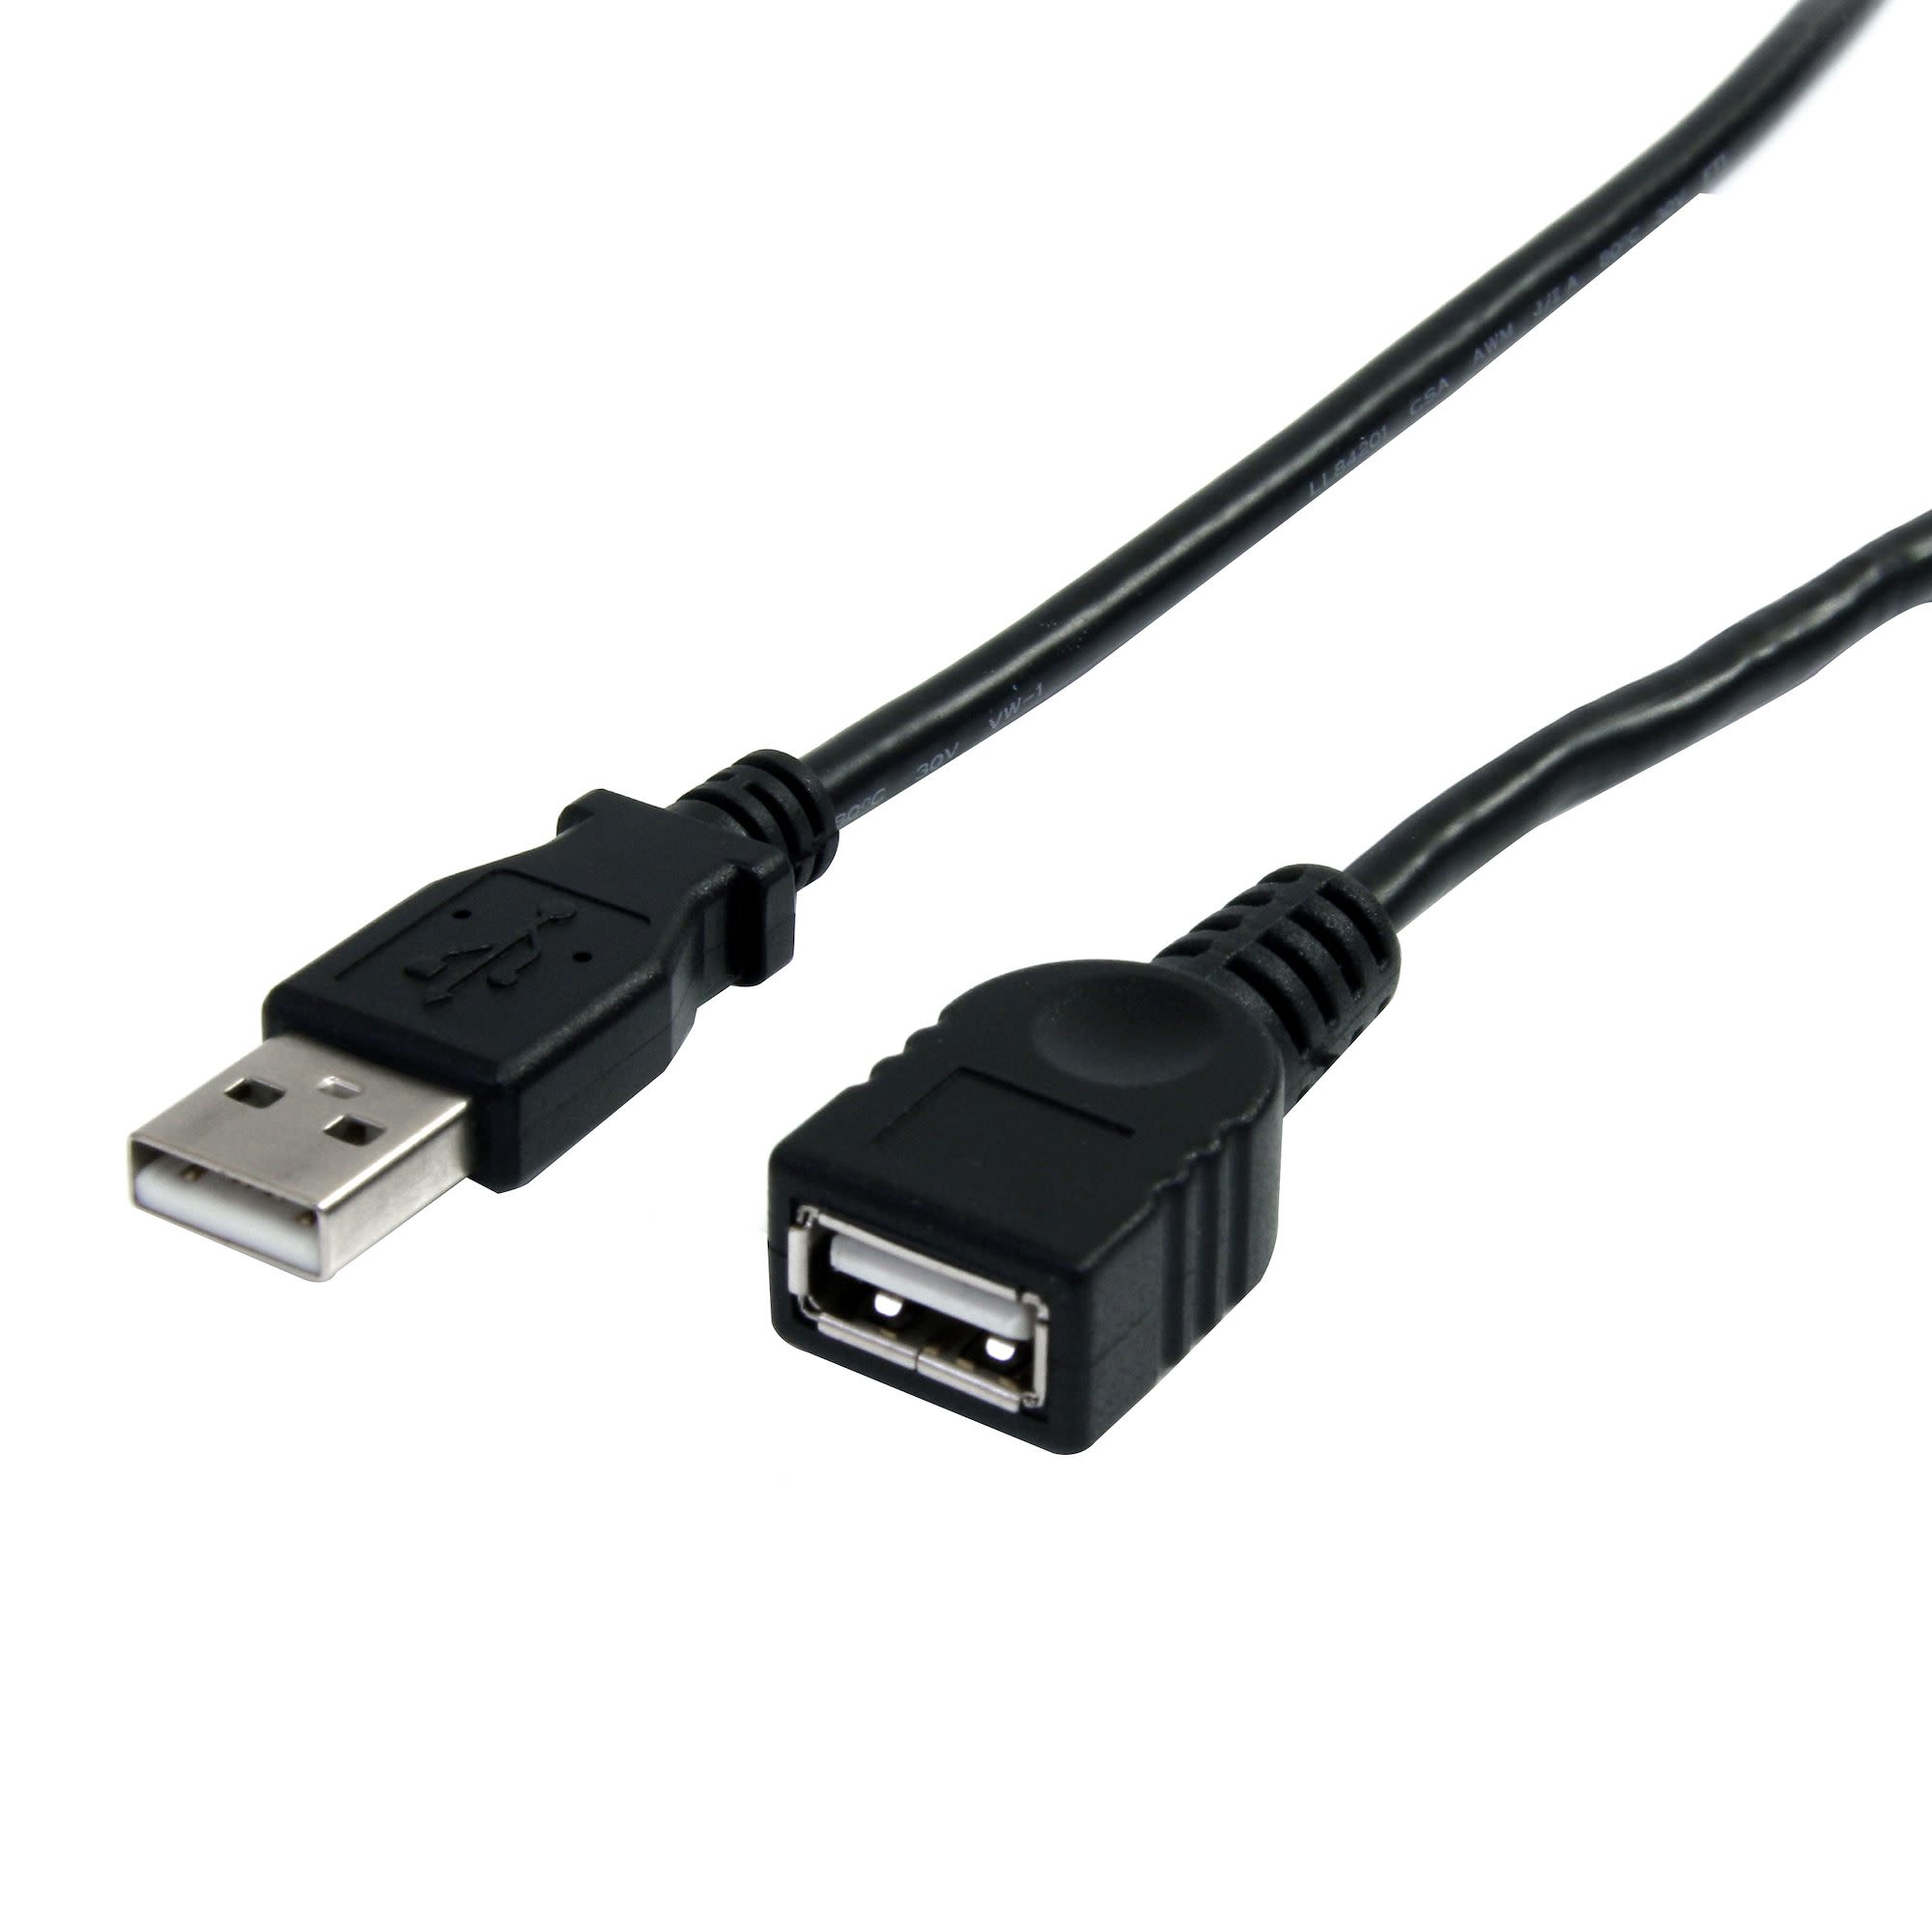 StarTech.com Male USB A to Female USB A USB Extension Cable, USB 2.0, 3m